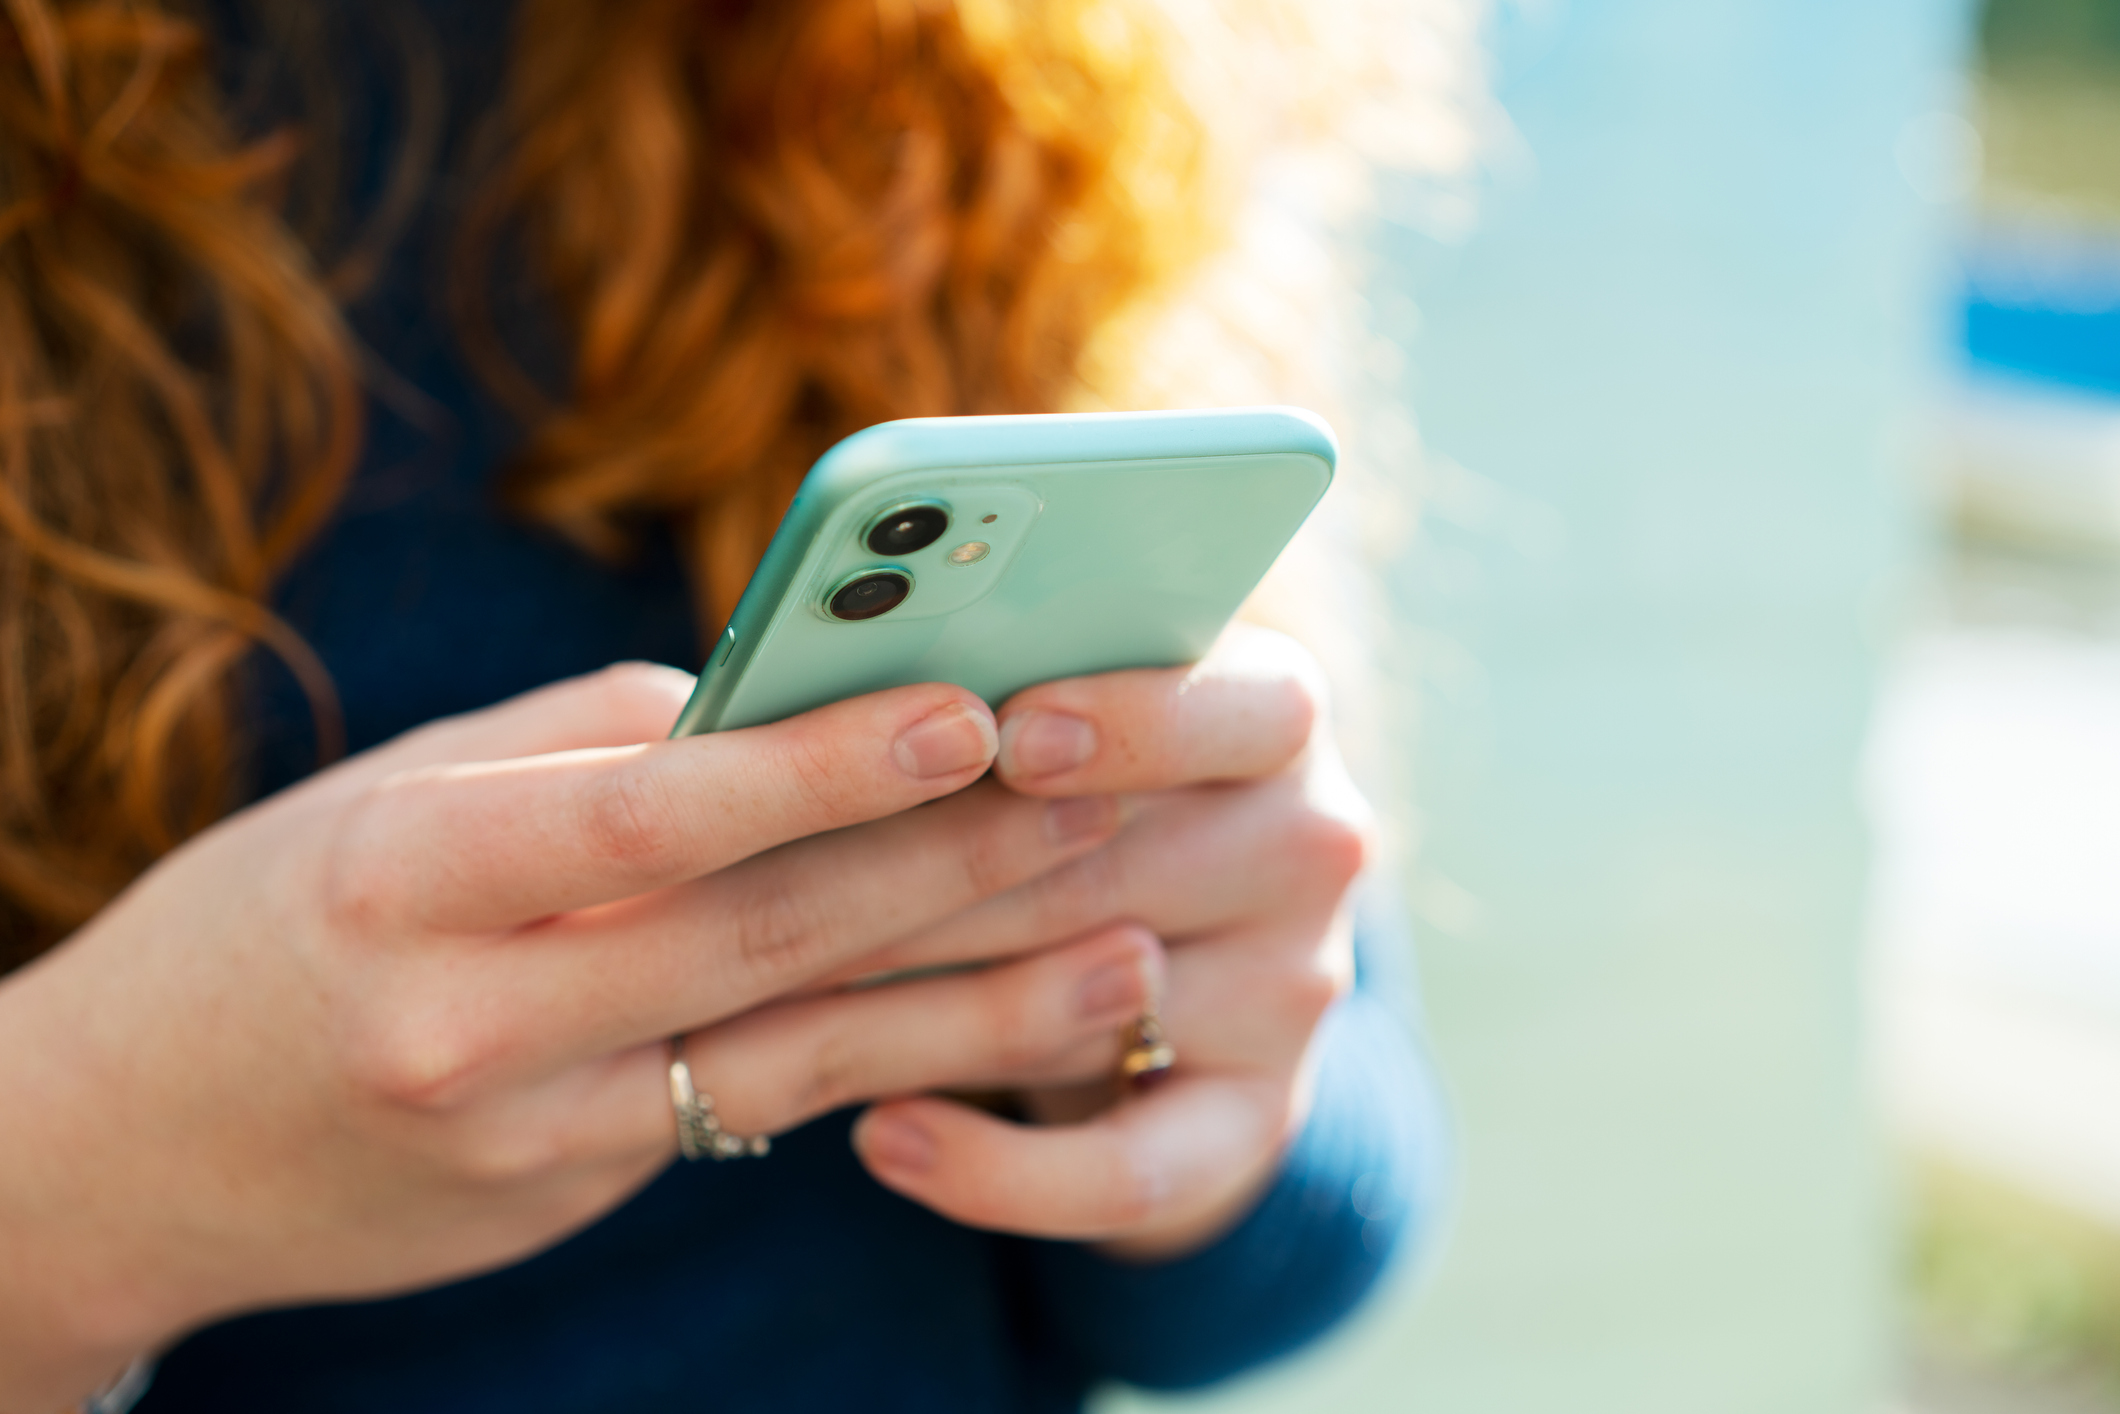 A stock photo shows a woman with long curly red hair using a pale green cell phone.